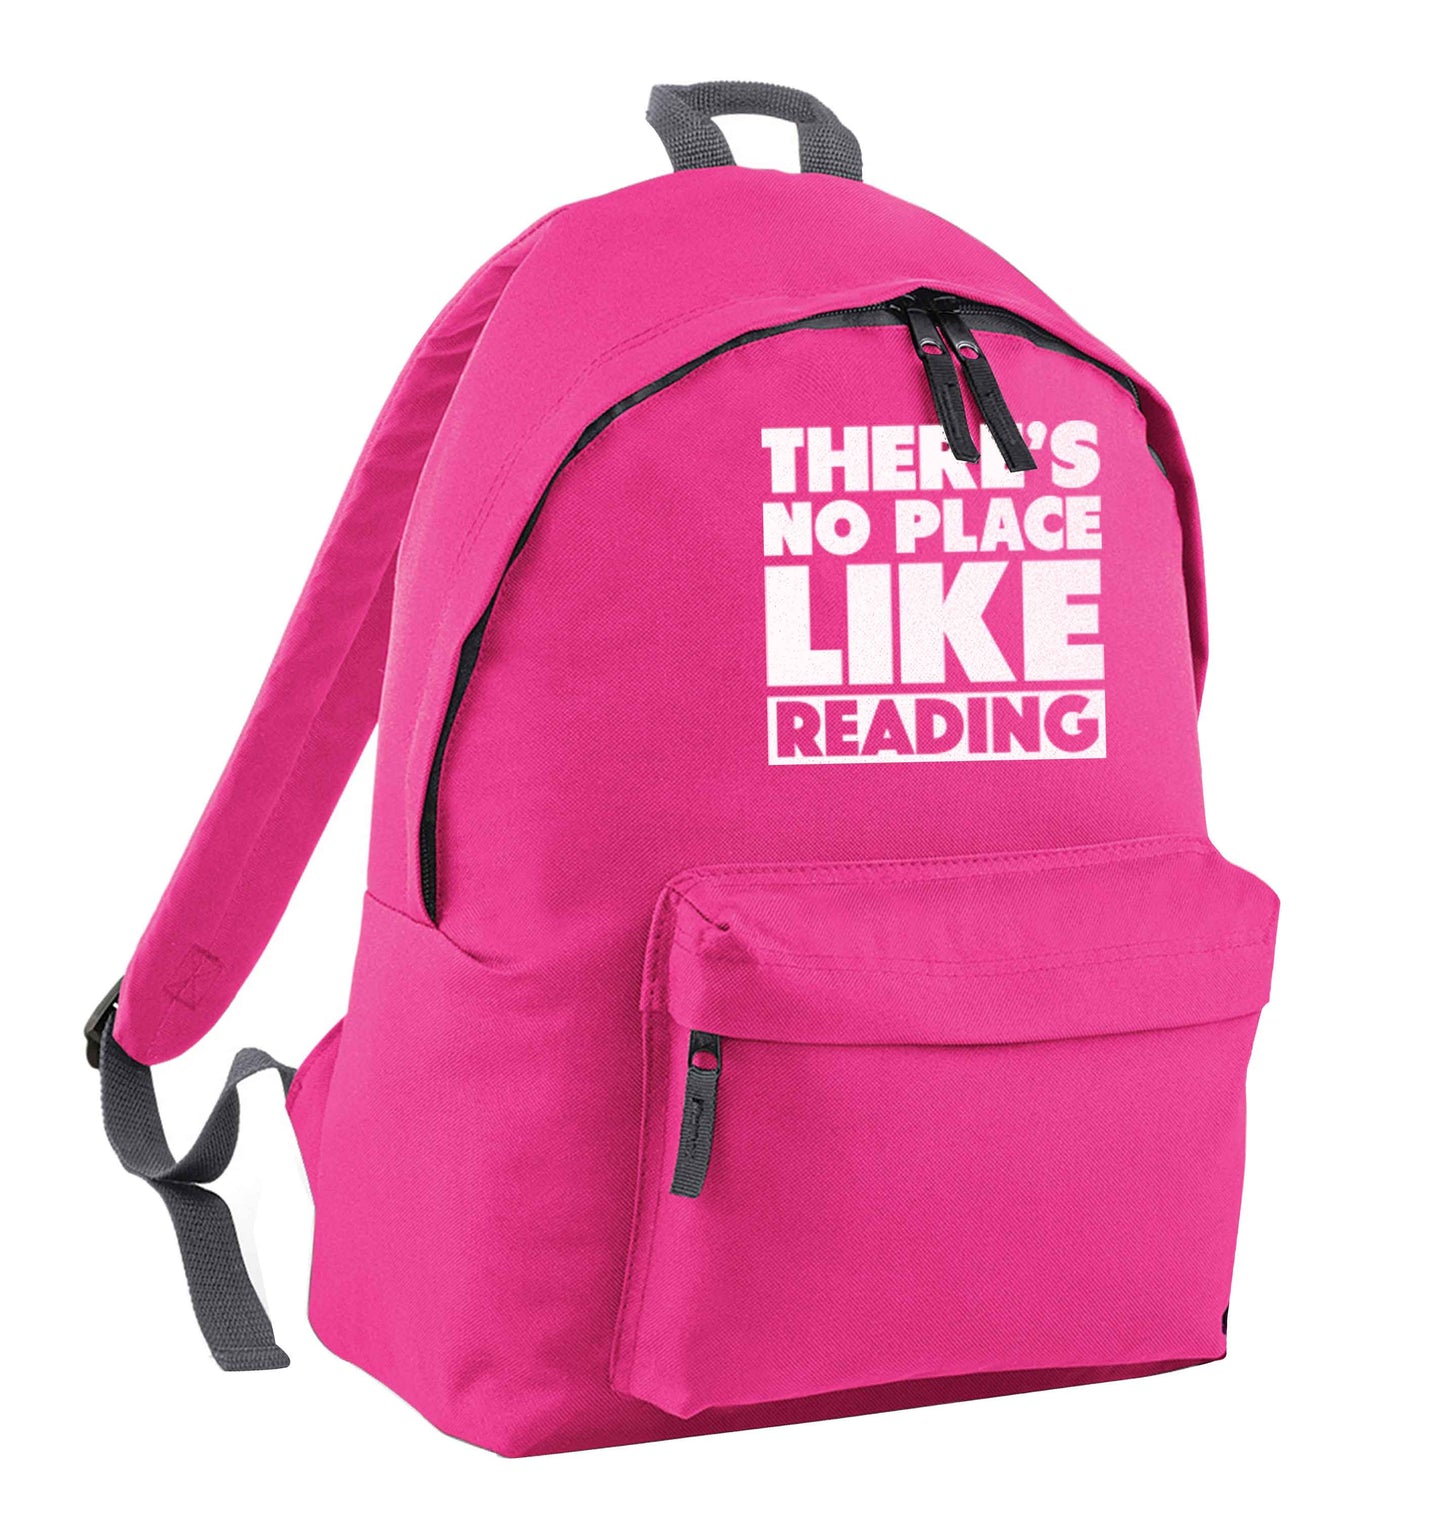 There's no place like Readingpink children's backpack